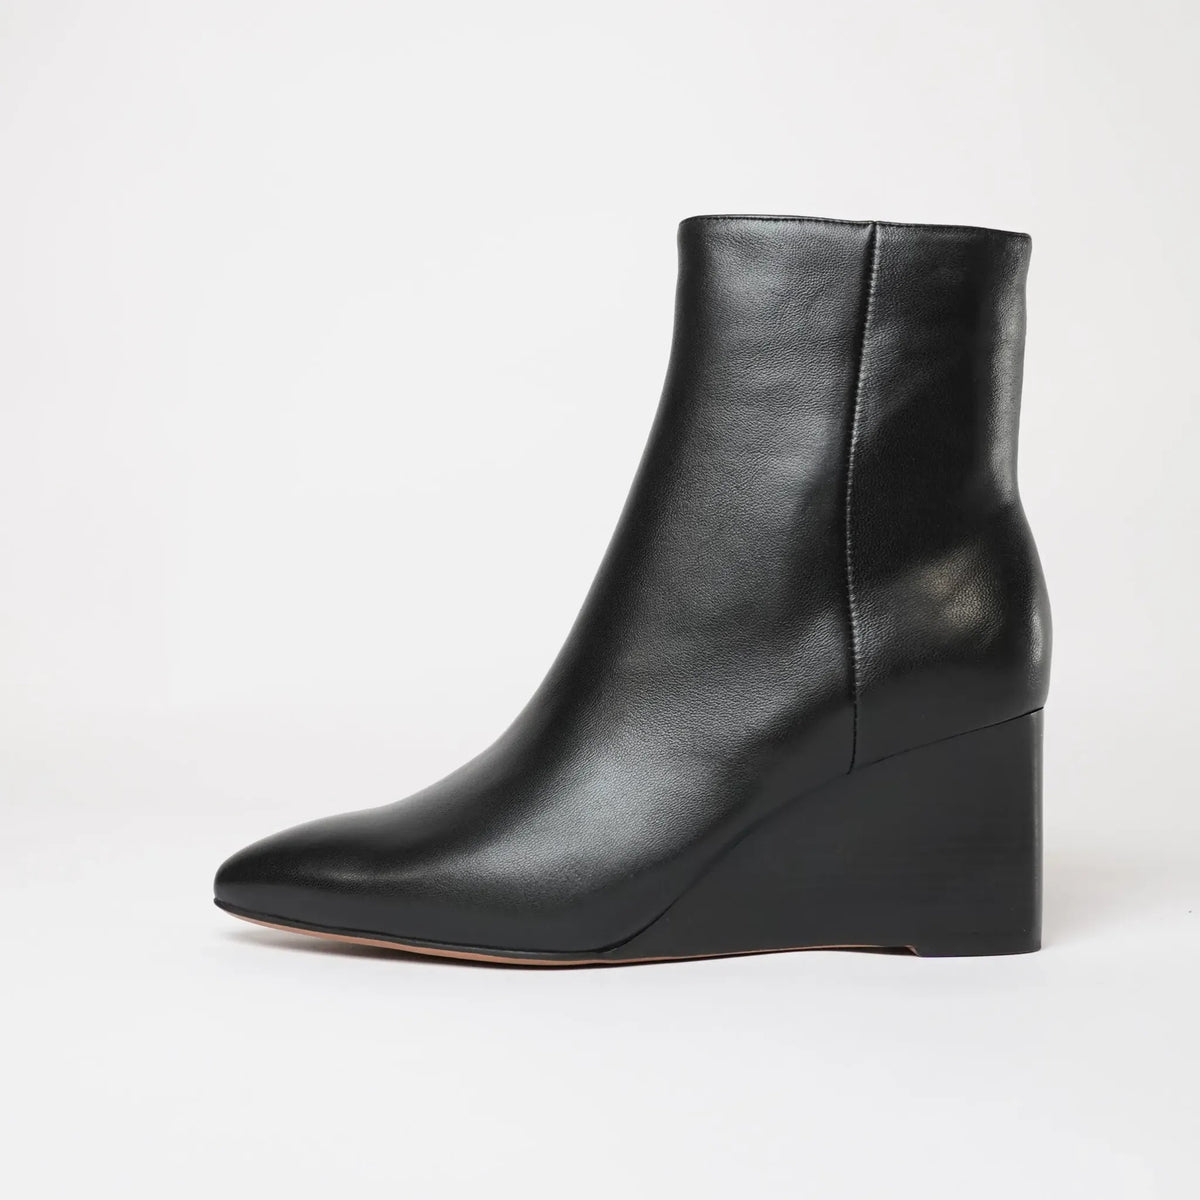 Mallo Black Leather Ankle Boots